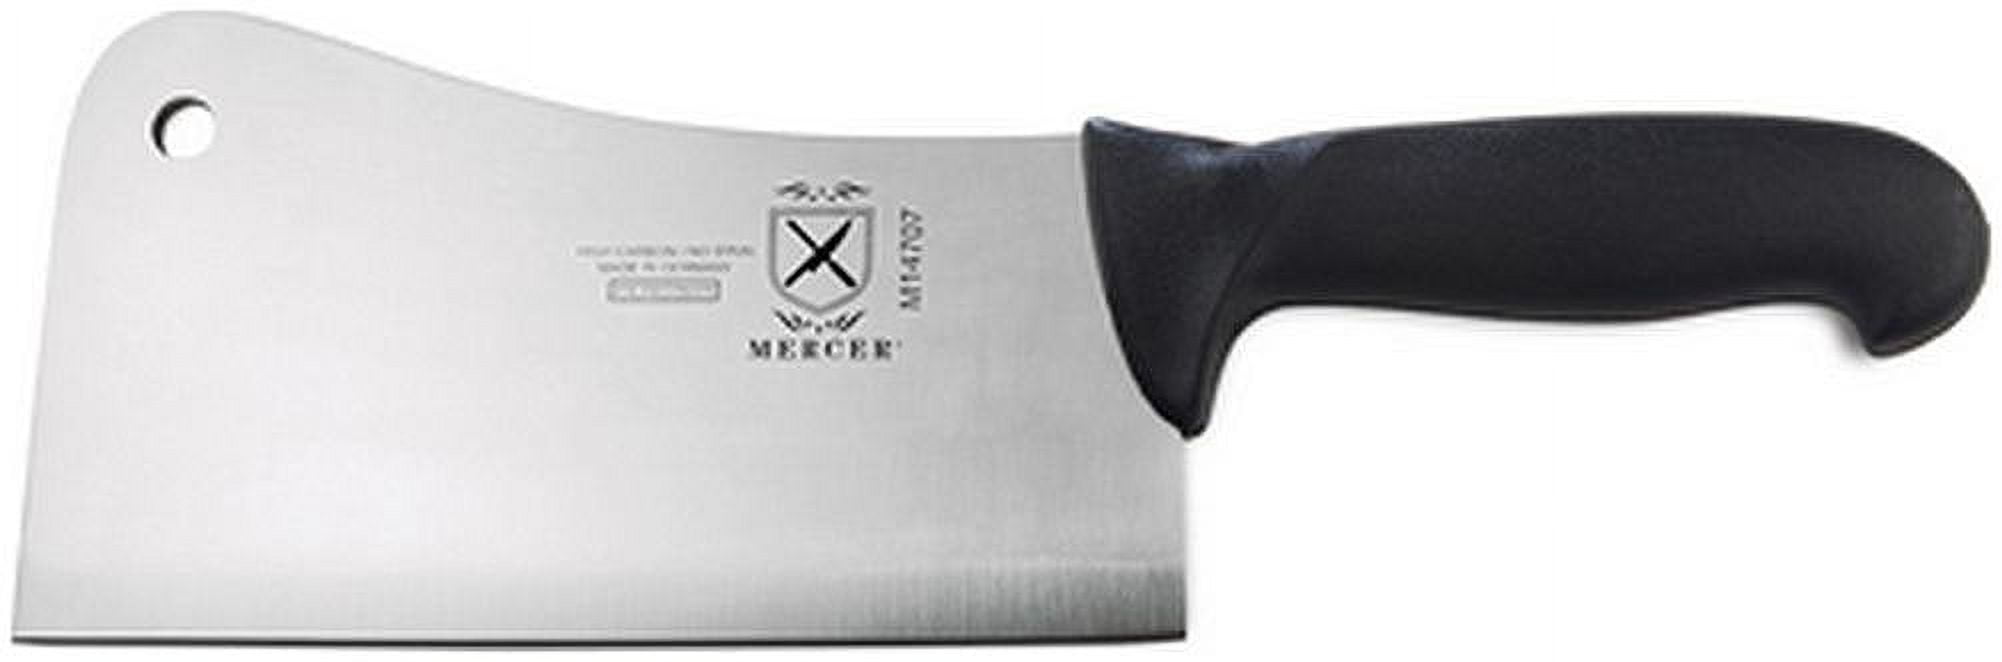 Mercer Knives Meat Cleaver - Tools Collection - 7 Inch